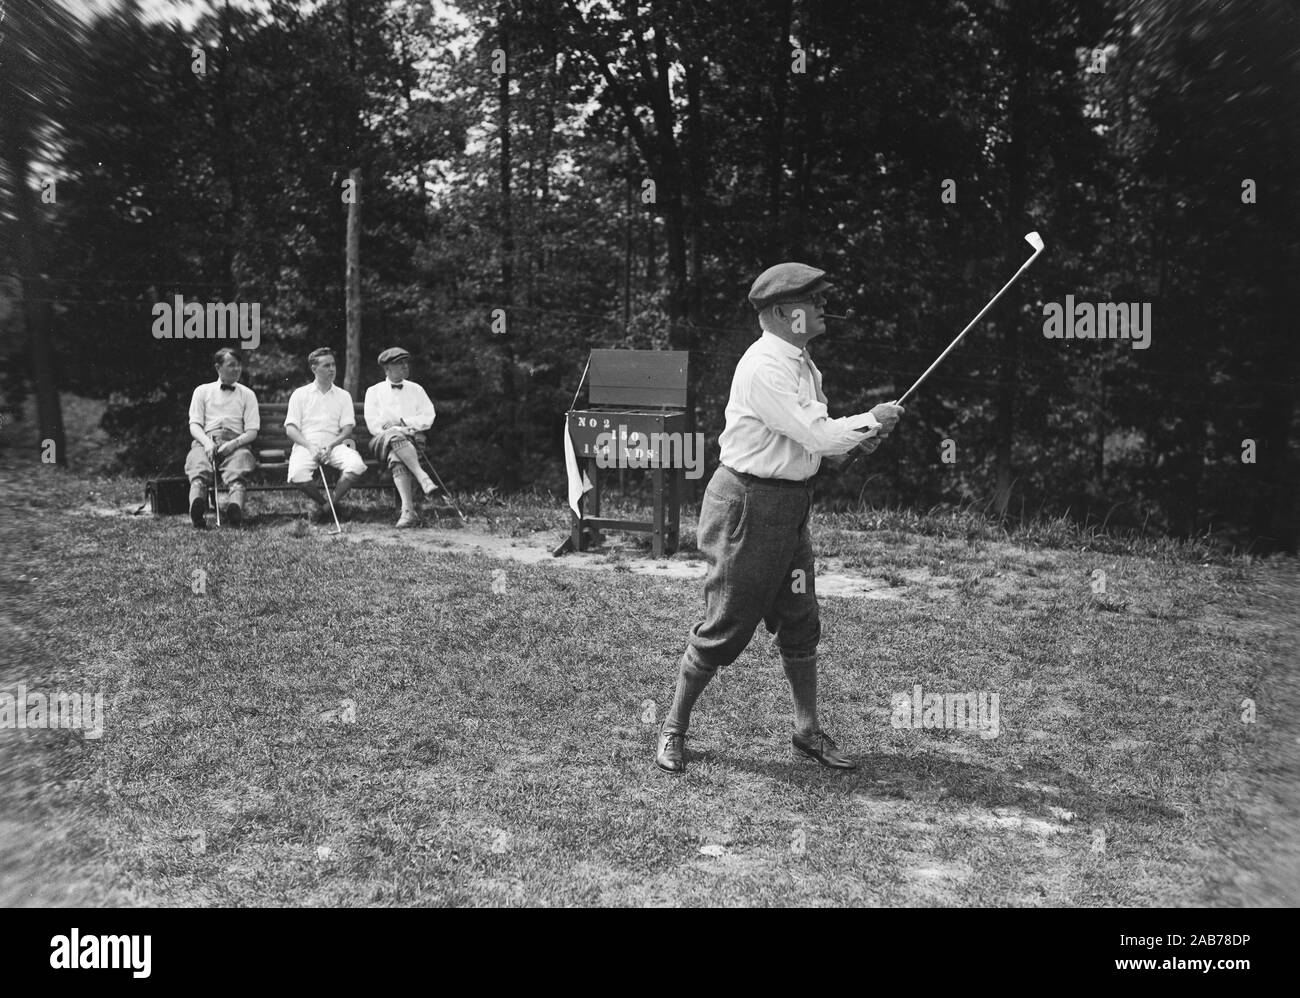 Vintage Golf Photos - Golfer after swinging at a ball ca. 1924 Stock Photo